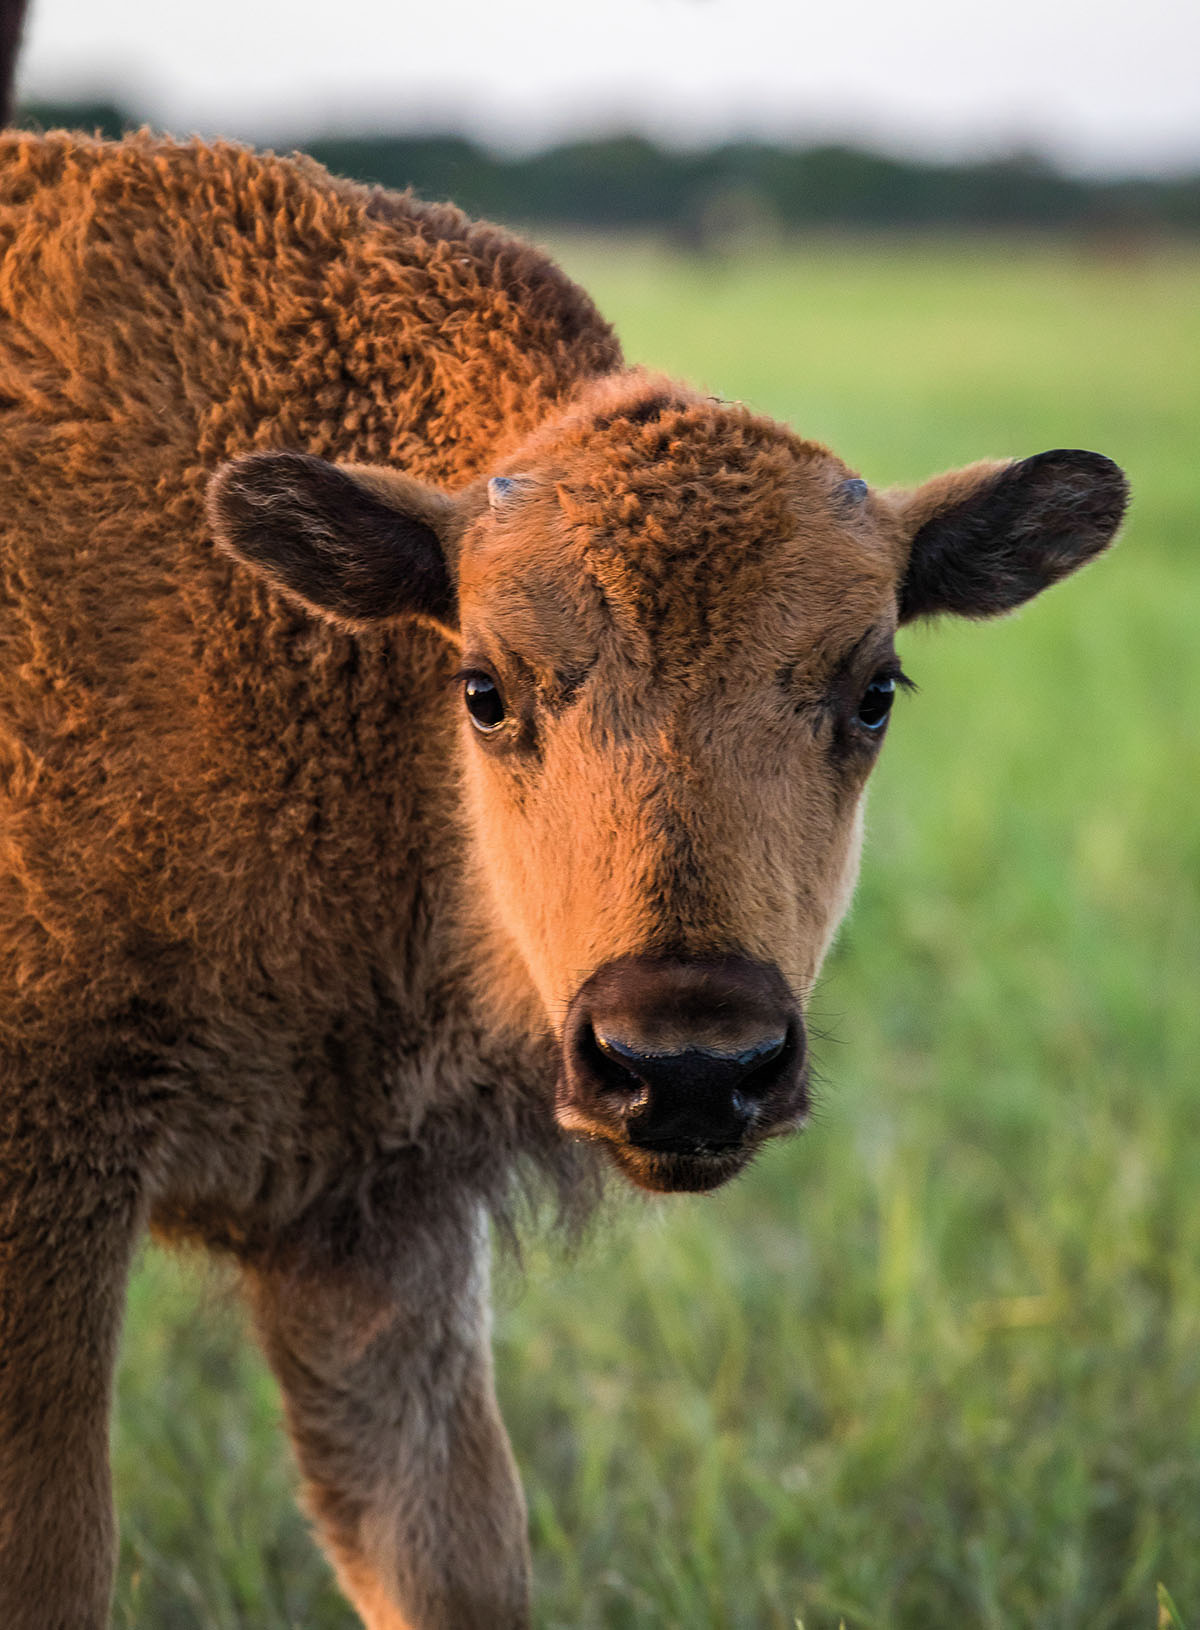 A bison calf bends down toward the camera in a field of grass